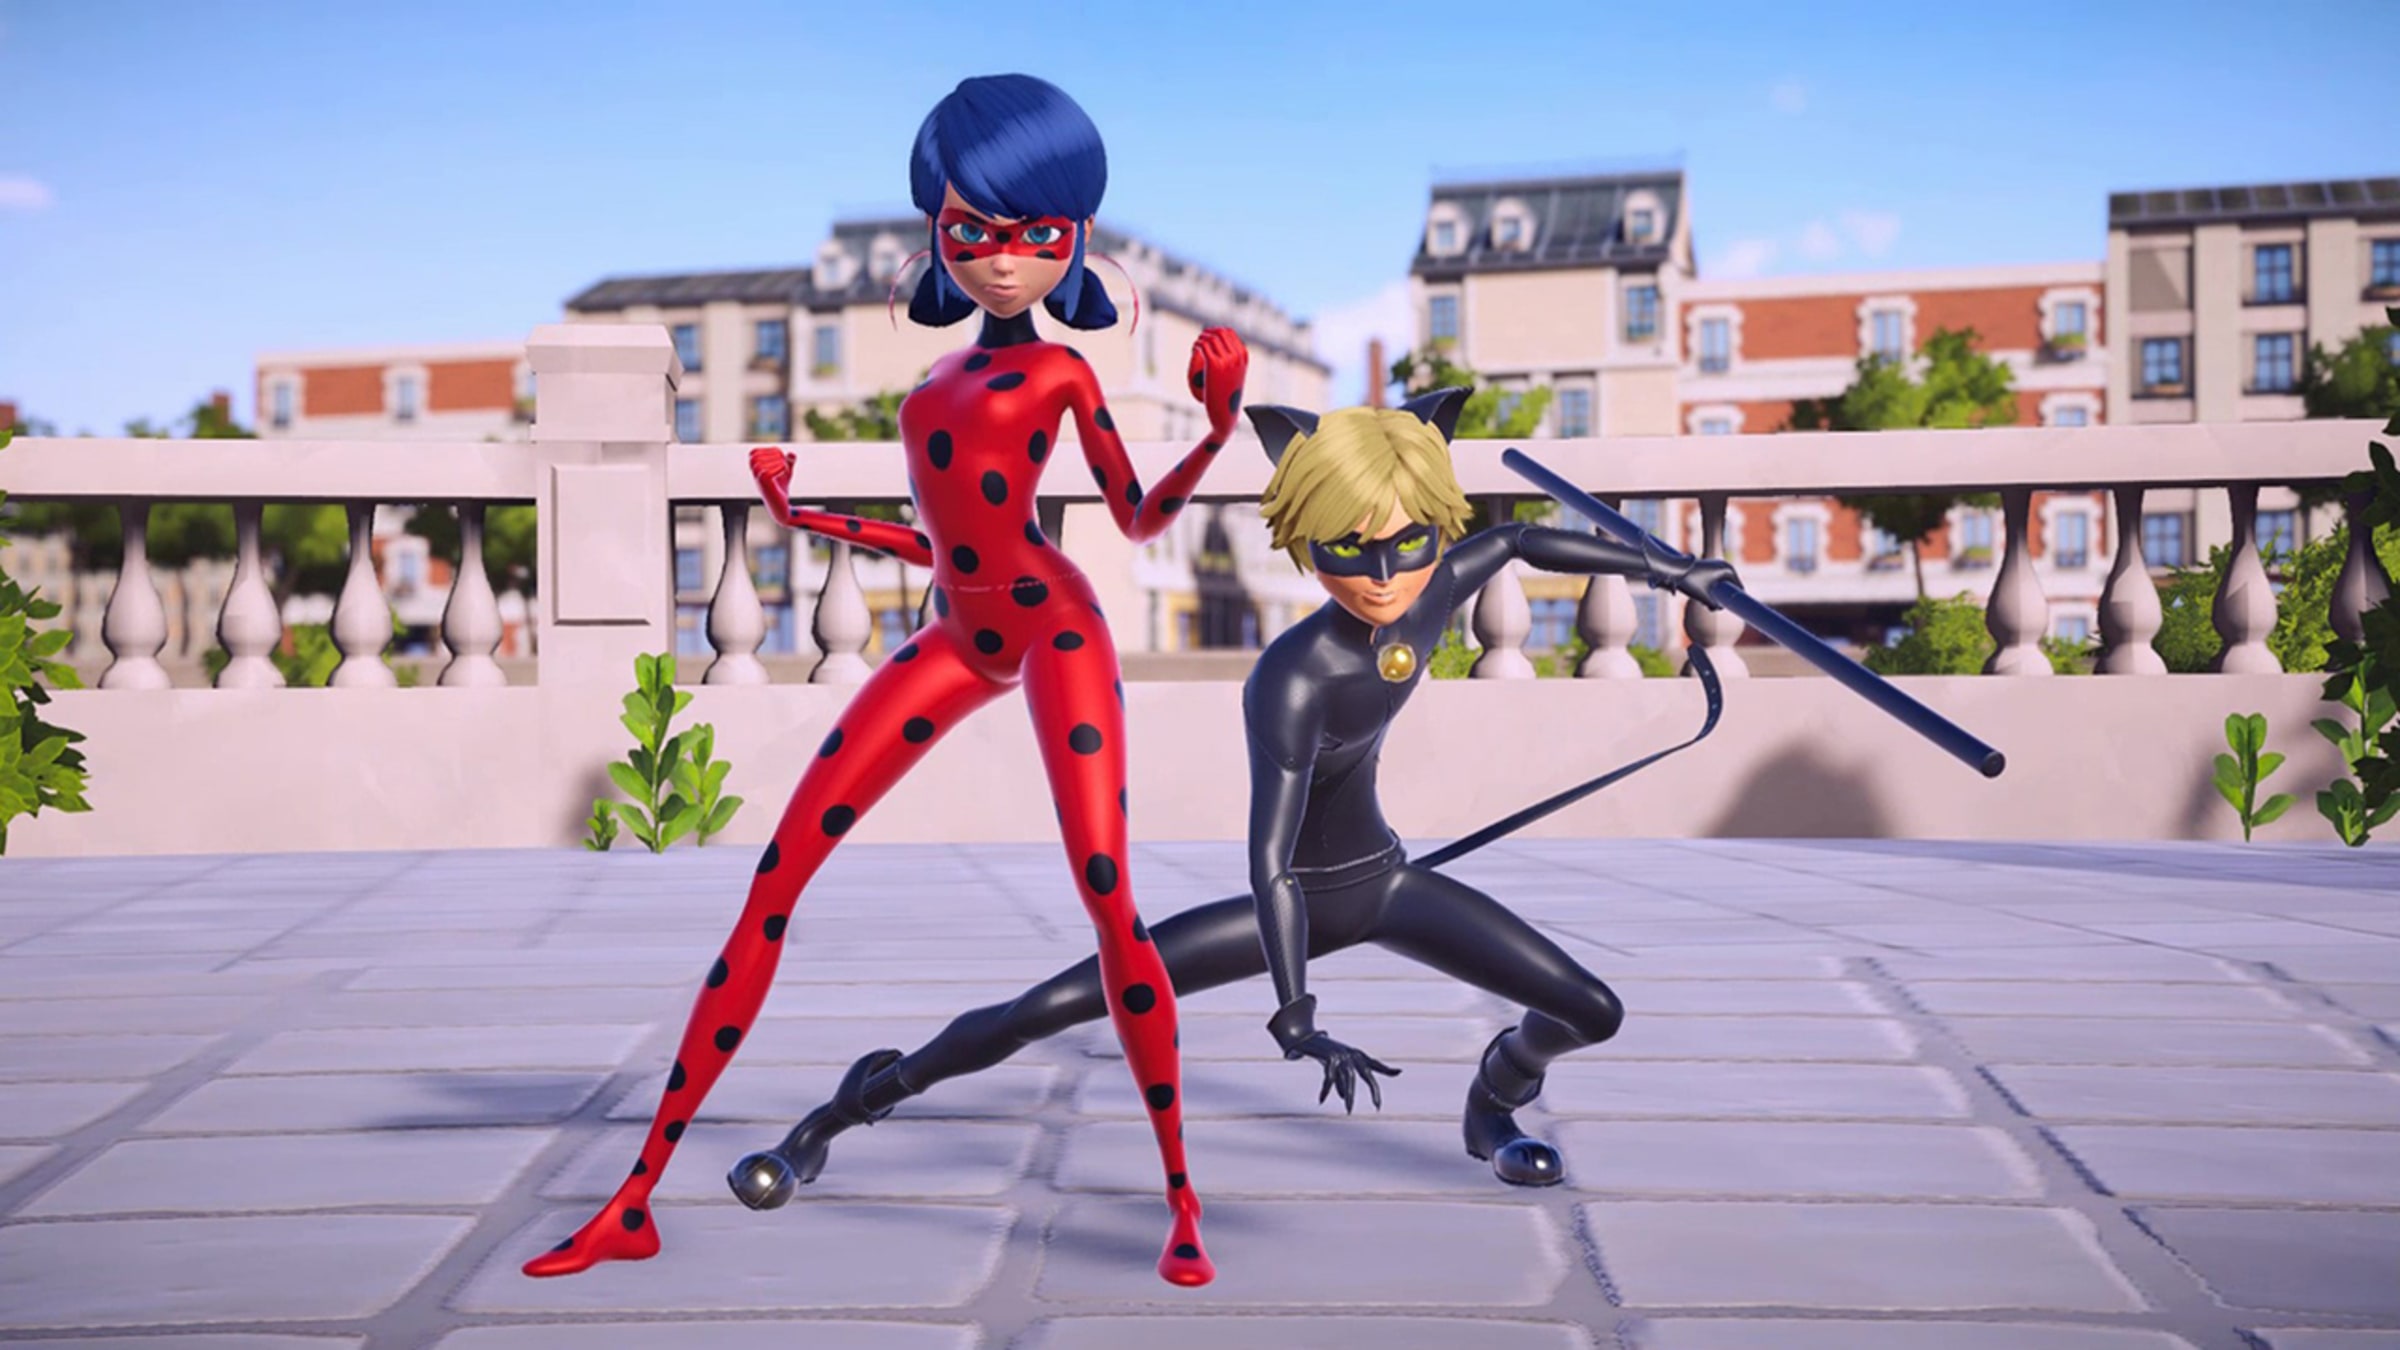 https://assets.nintendo.com/image/upload/c_fill,w_1200/q_auto:best/f_auto/dpr_2.0/ncom/en_US/games/switch/m/miraculous-rise-of-the-sphinx-switch/